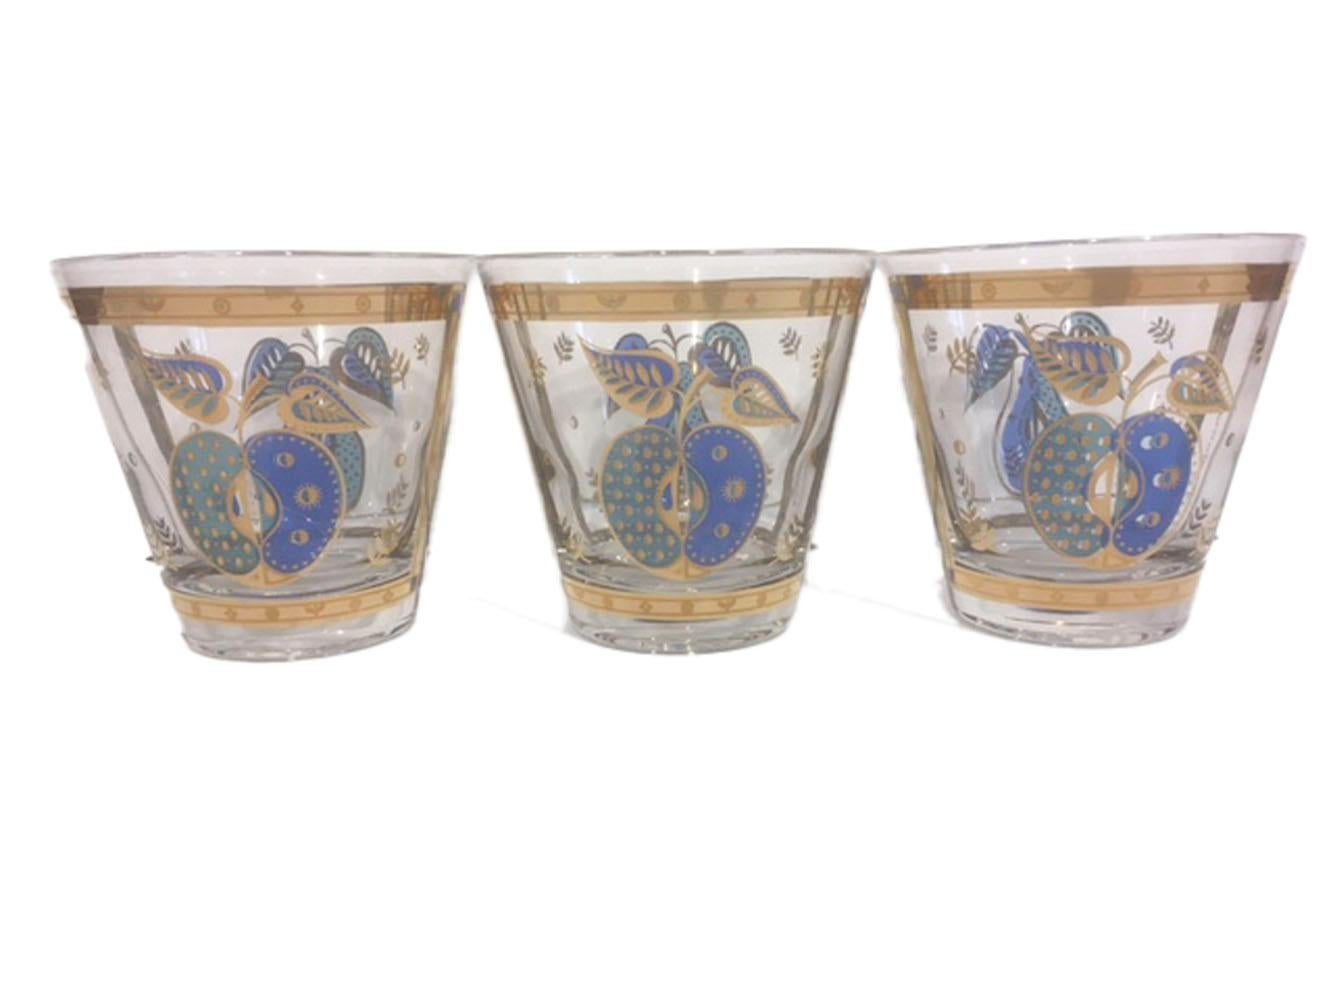 Vintage Old Fashioned Glasses by Georges Briard in the Forbidden Fruit Pattern 1